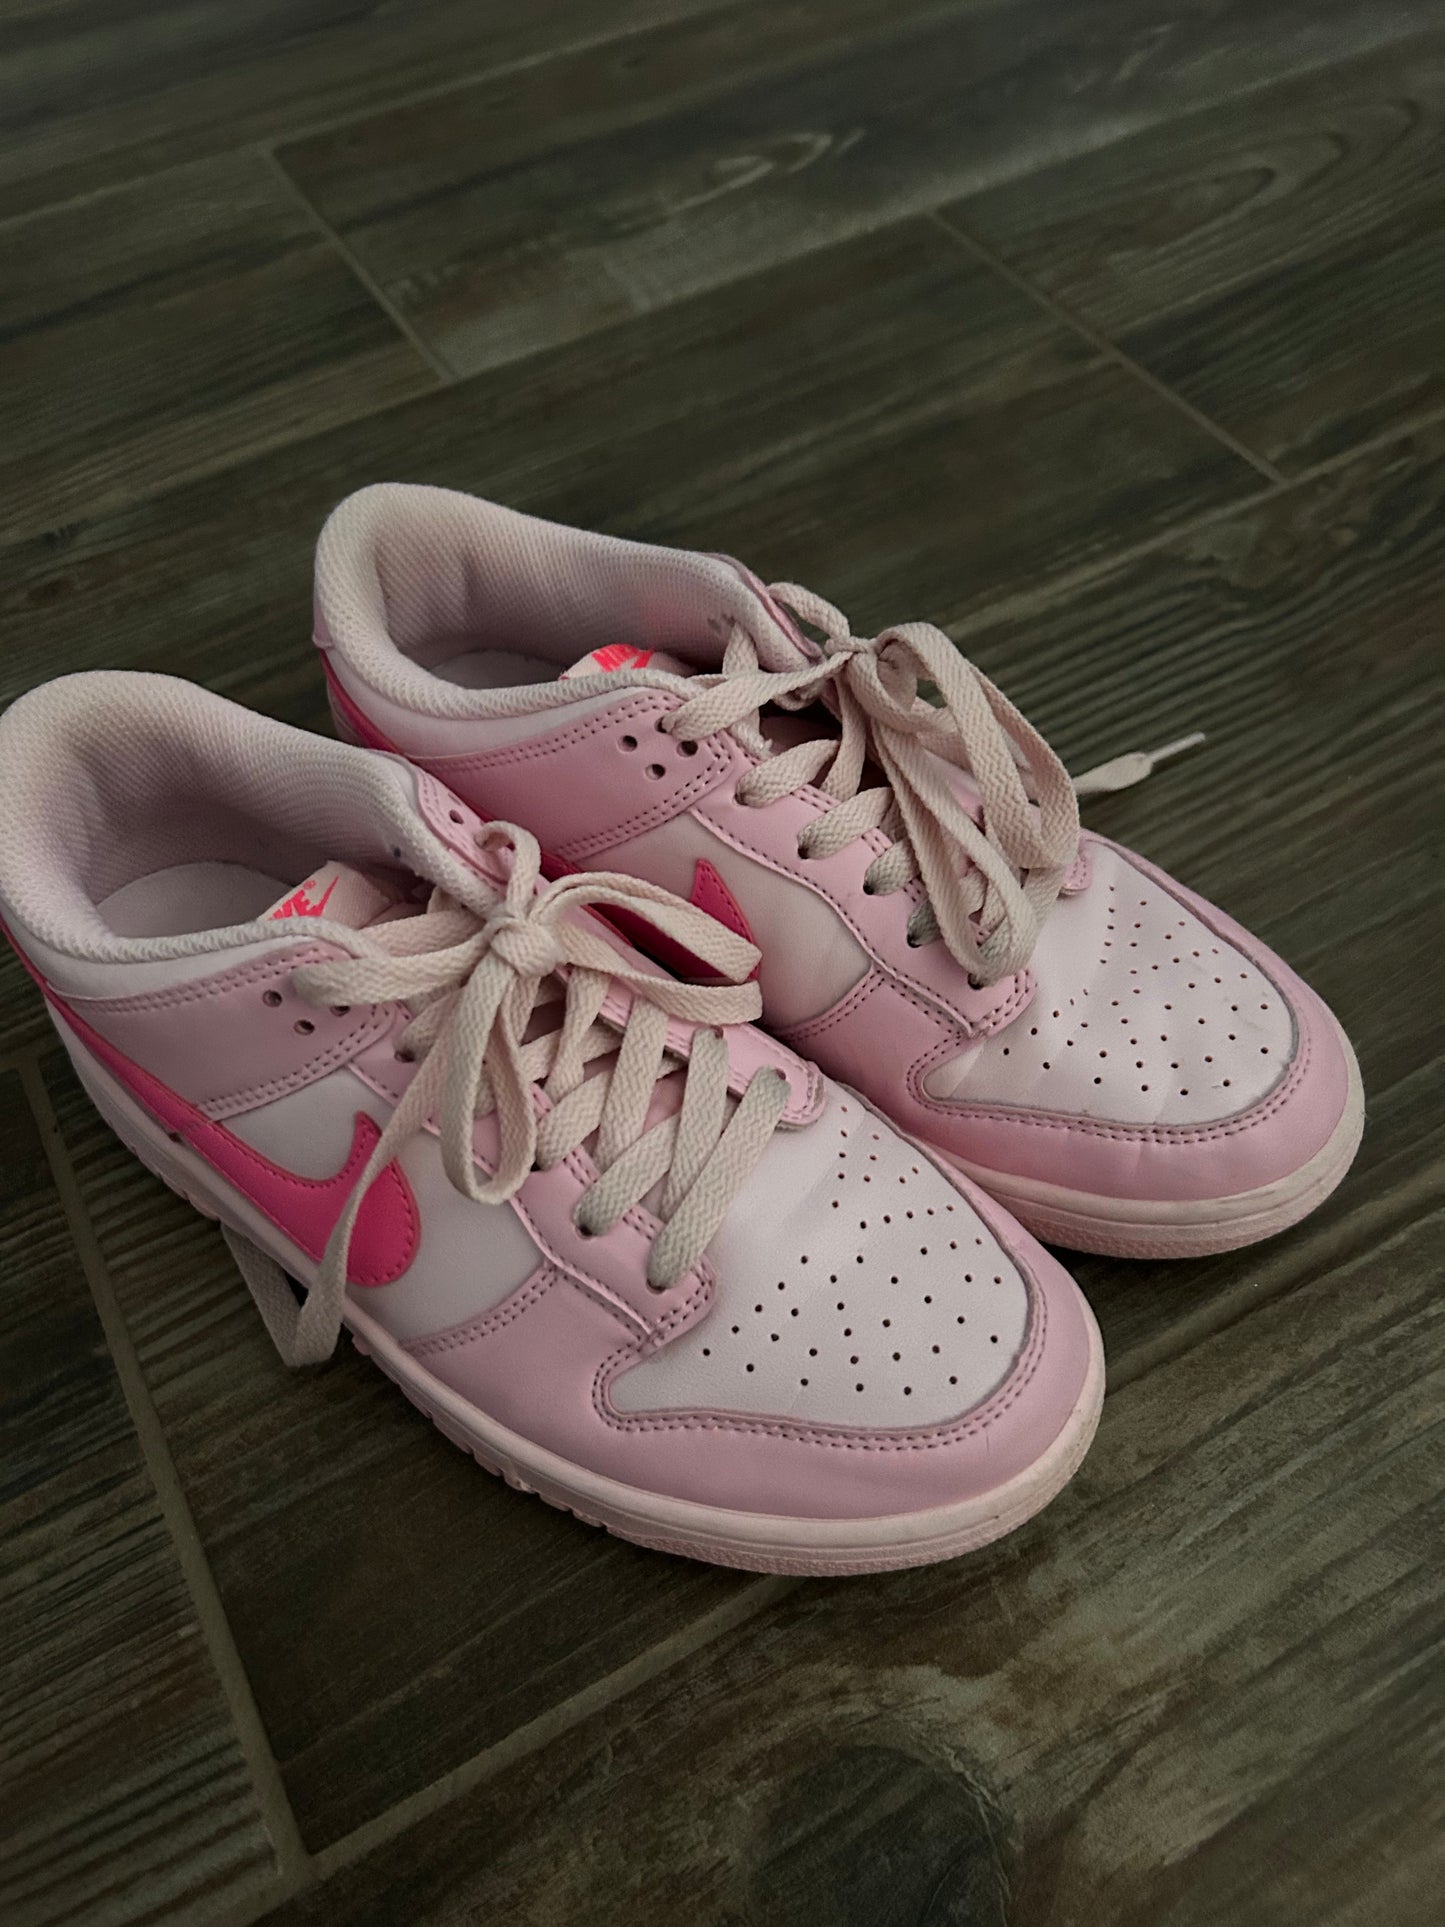 Women's Size 8 Nike Pink Shoes- Good Used Condition